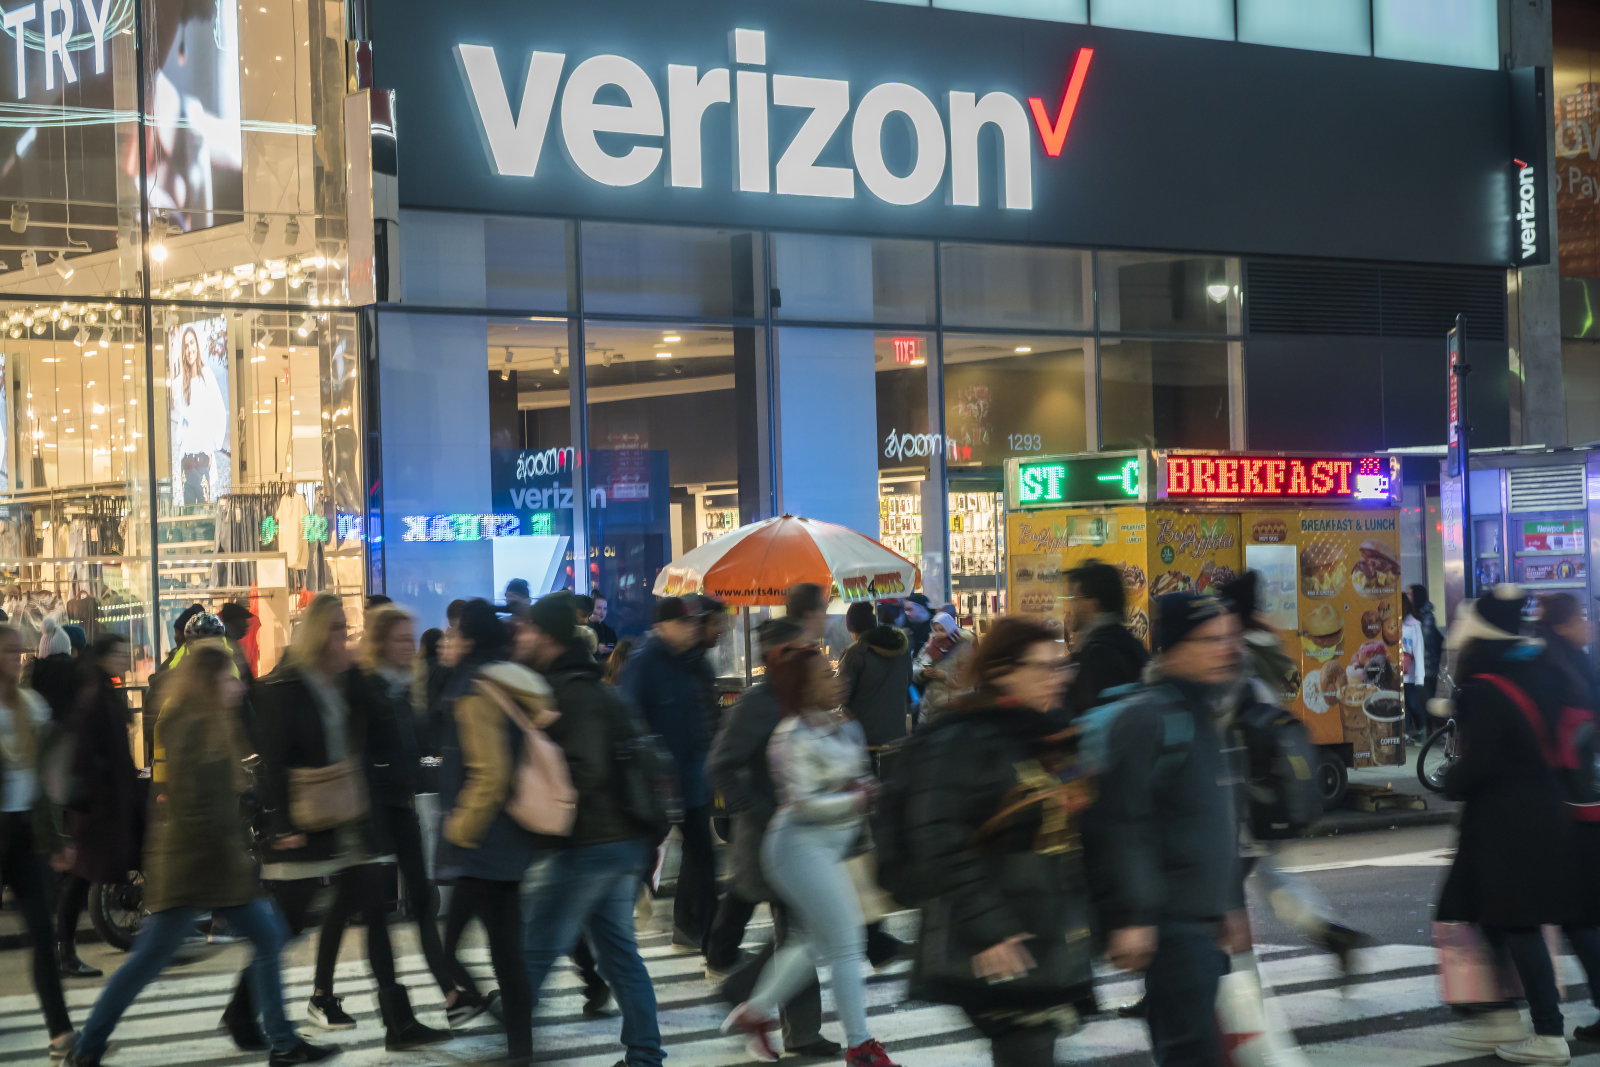 A Verizon Wireless store in the Herald Square neighborhood in New York on Tuesday, April 10, 2018. (ï¿½Photo by Richard B. Levine)